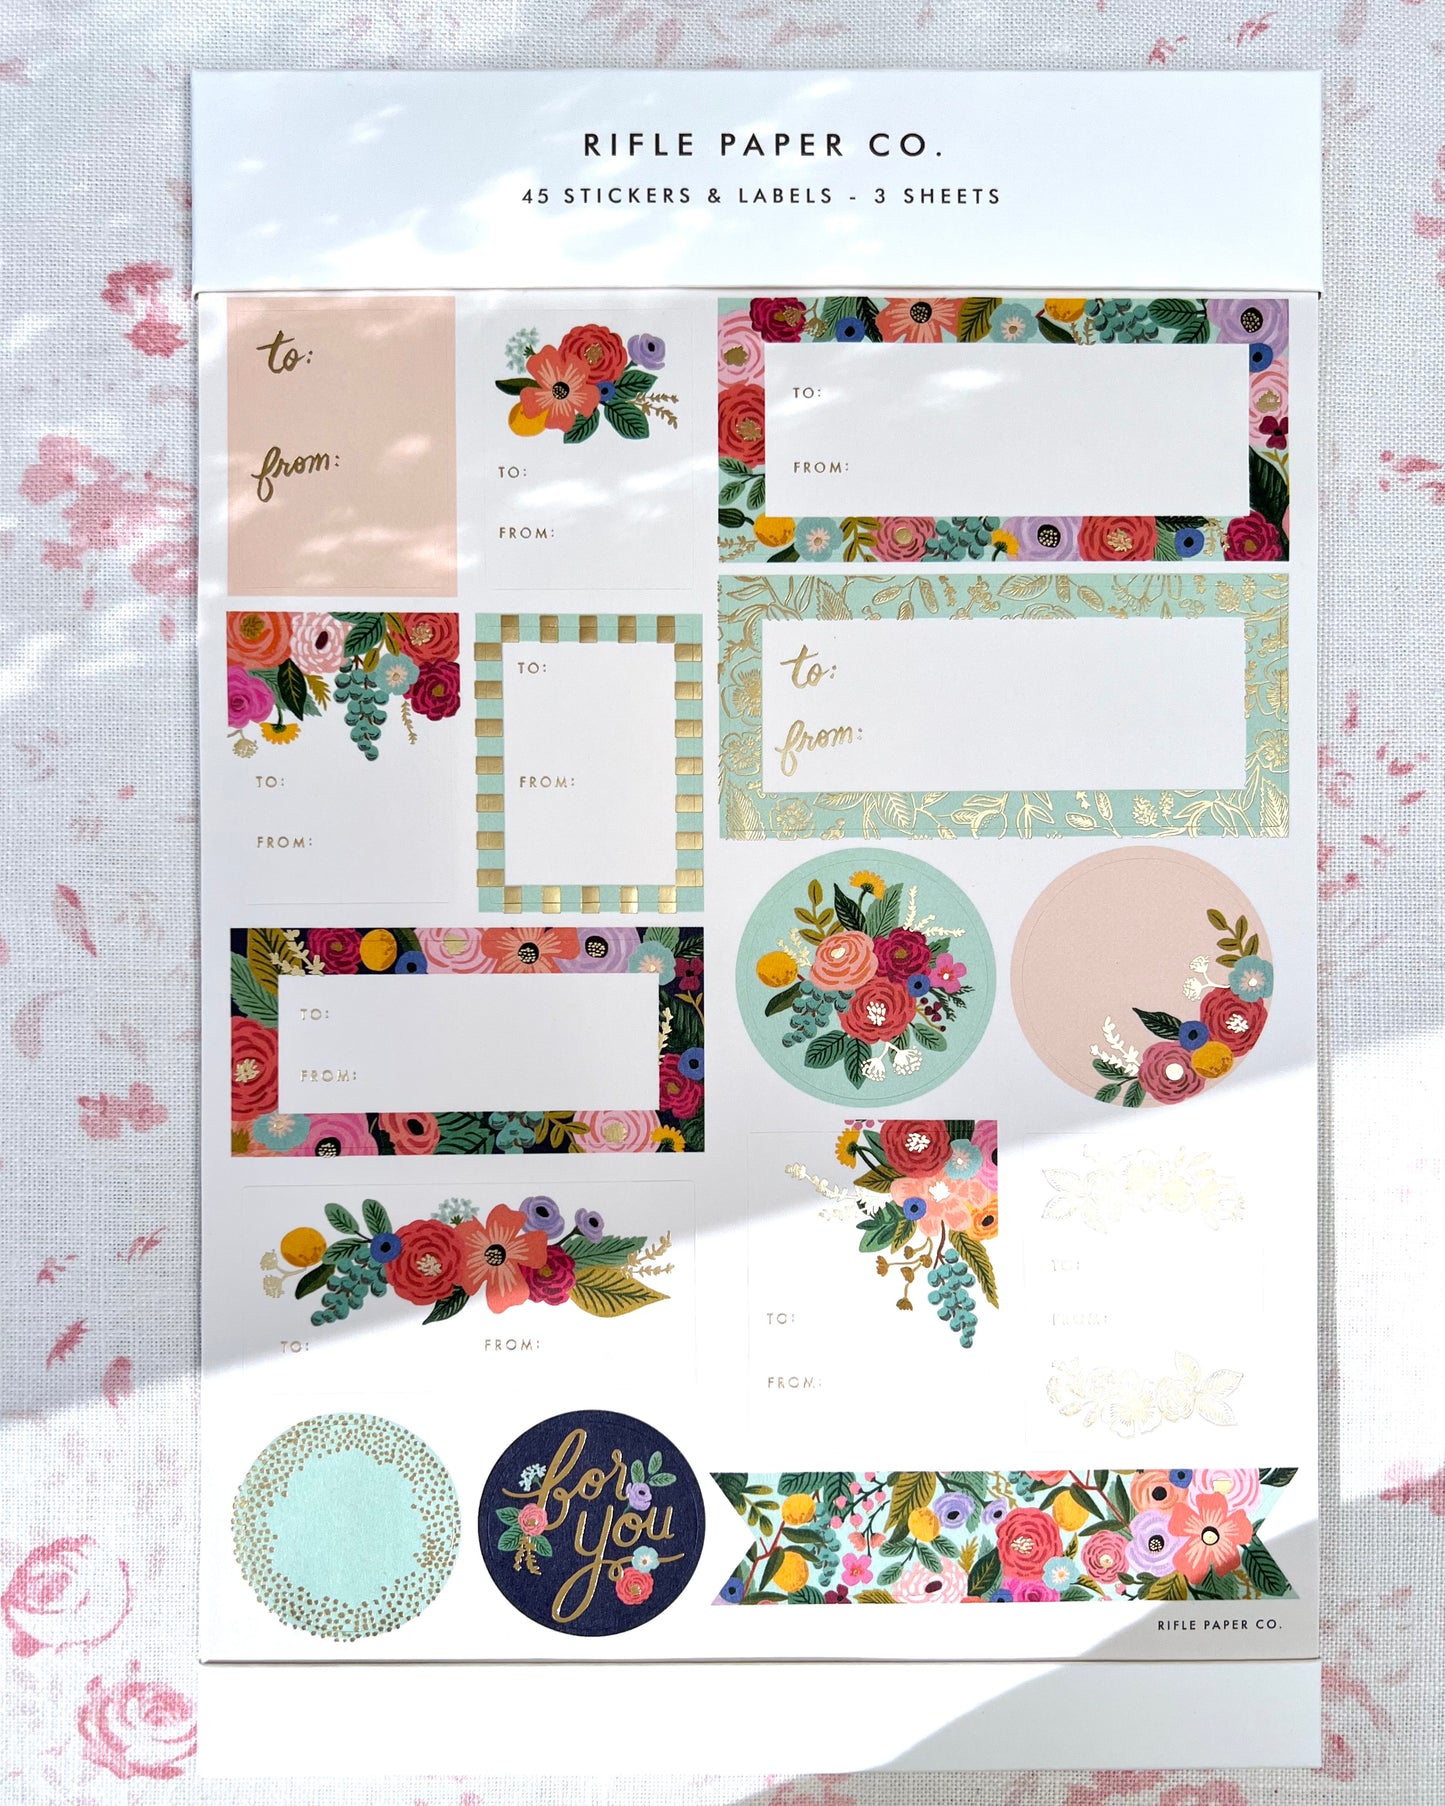 Rifle Paper Co. - Garden Party Stickers & Labels